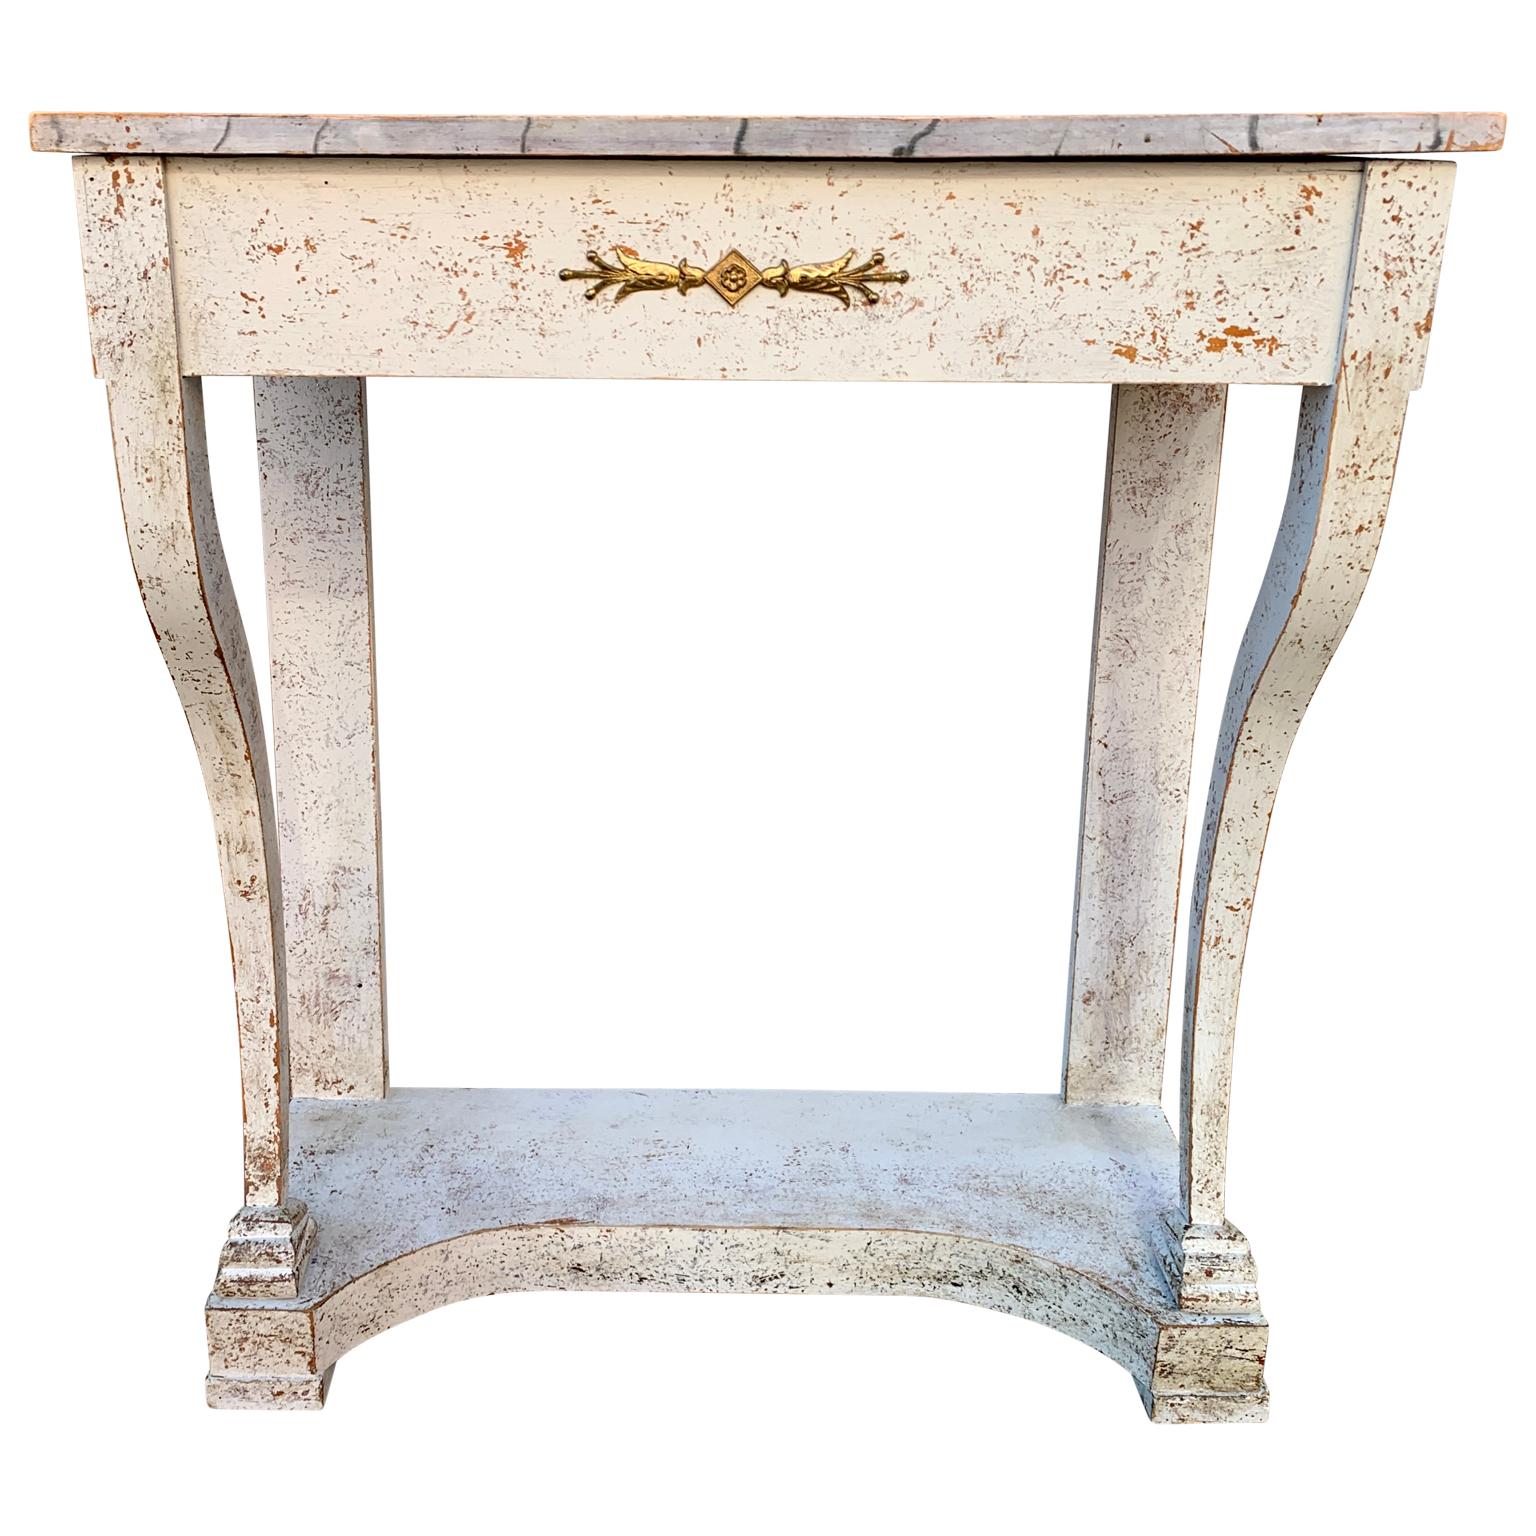 A light grey painted Gustavian painted with faux marble original imitation painting on the top. The Swedish console table with brass hardware on the front is from around 1800-1820 and build in pine as material. The imitation painting of the